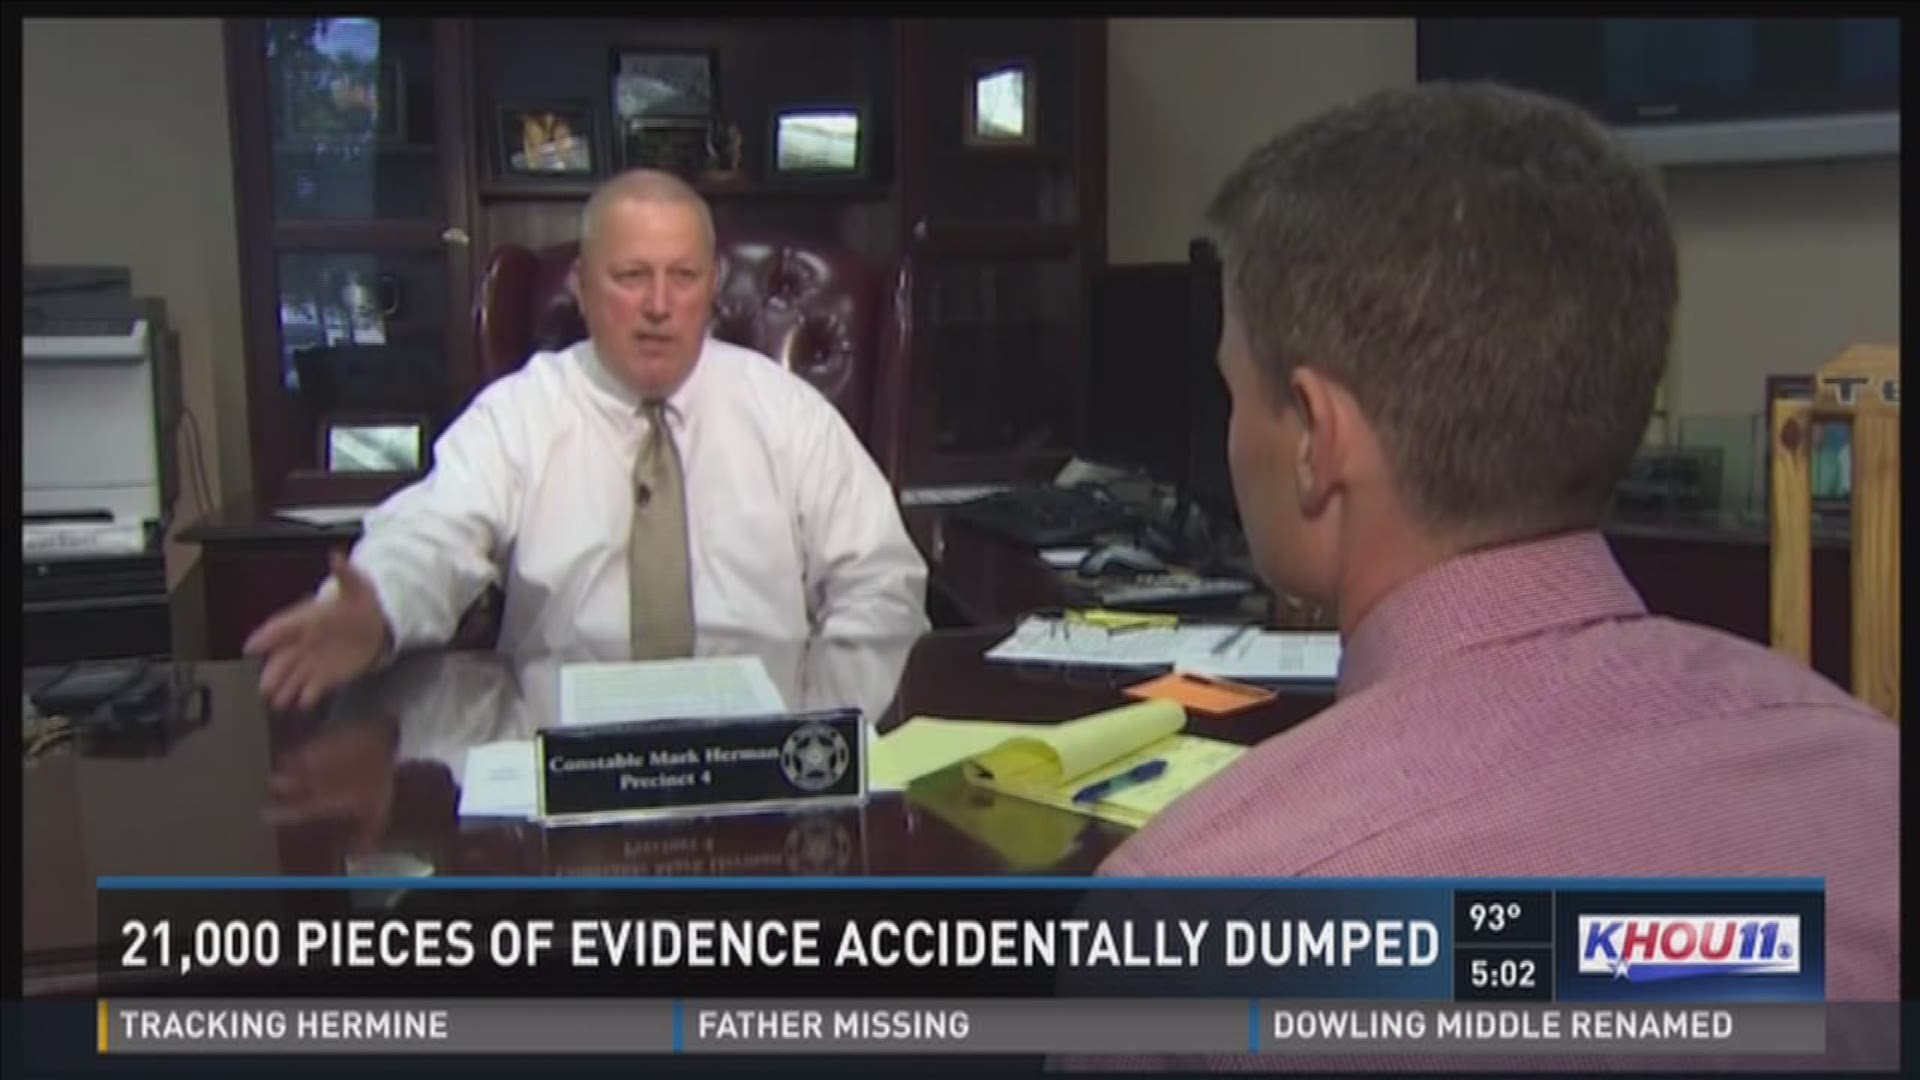 The district attorney's office is investigating why thousands of pieces of evidence were destroyed by the Harris County Precinct 4 Constable's Office. Deputy Chris Hess was fired by Constable Mark Herman after he allegedly dumped the evidence while cleani